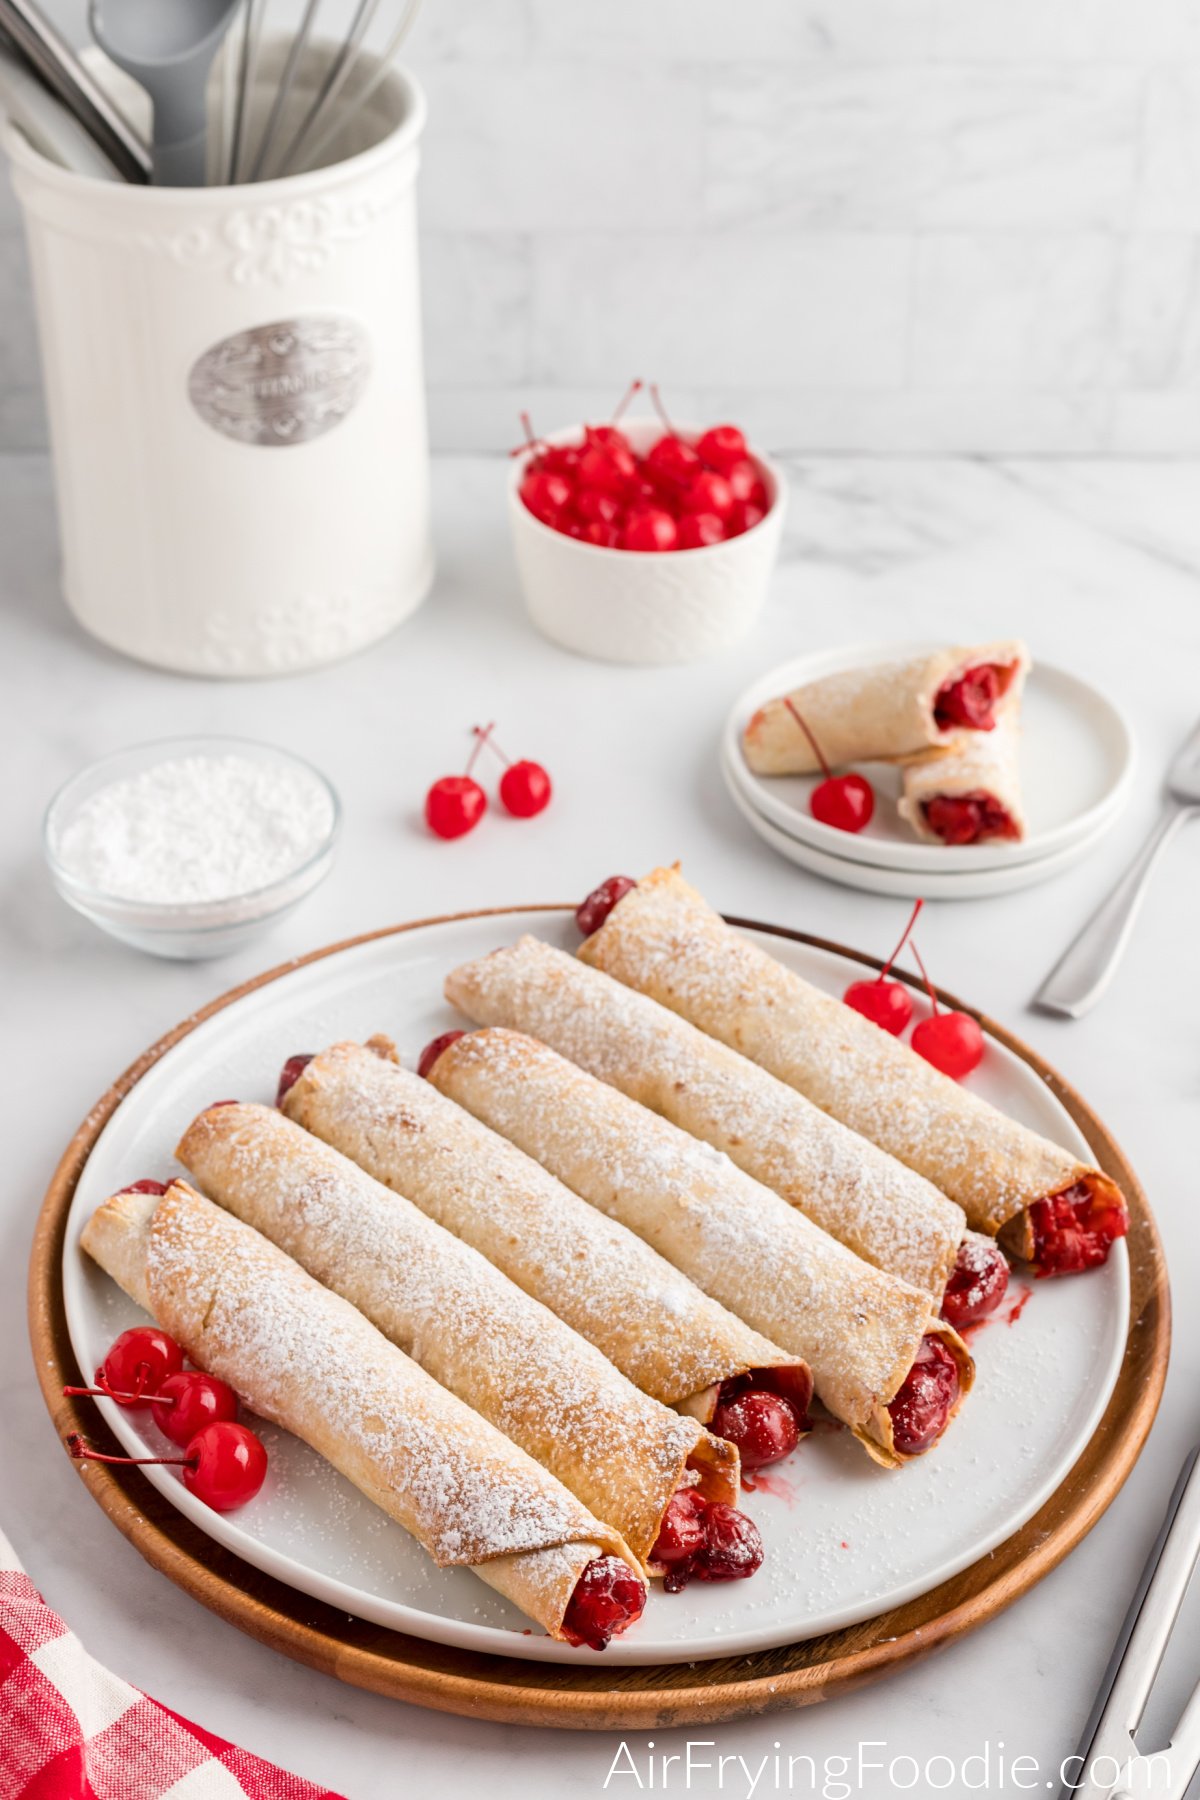 Cherry pie taquitos made in the air fryer and served on a plate dusted with sugar.
